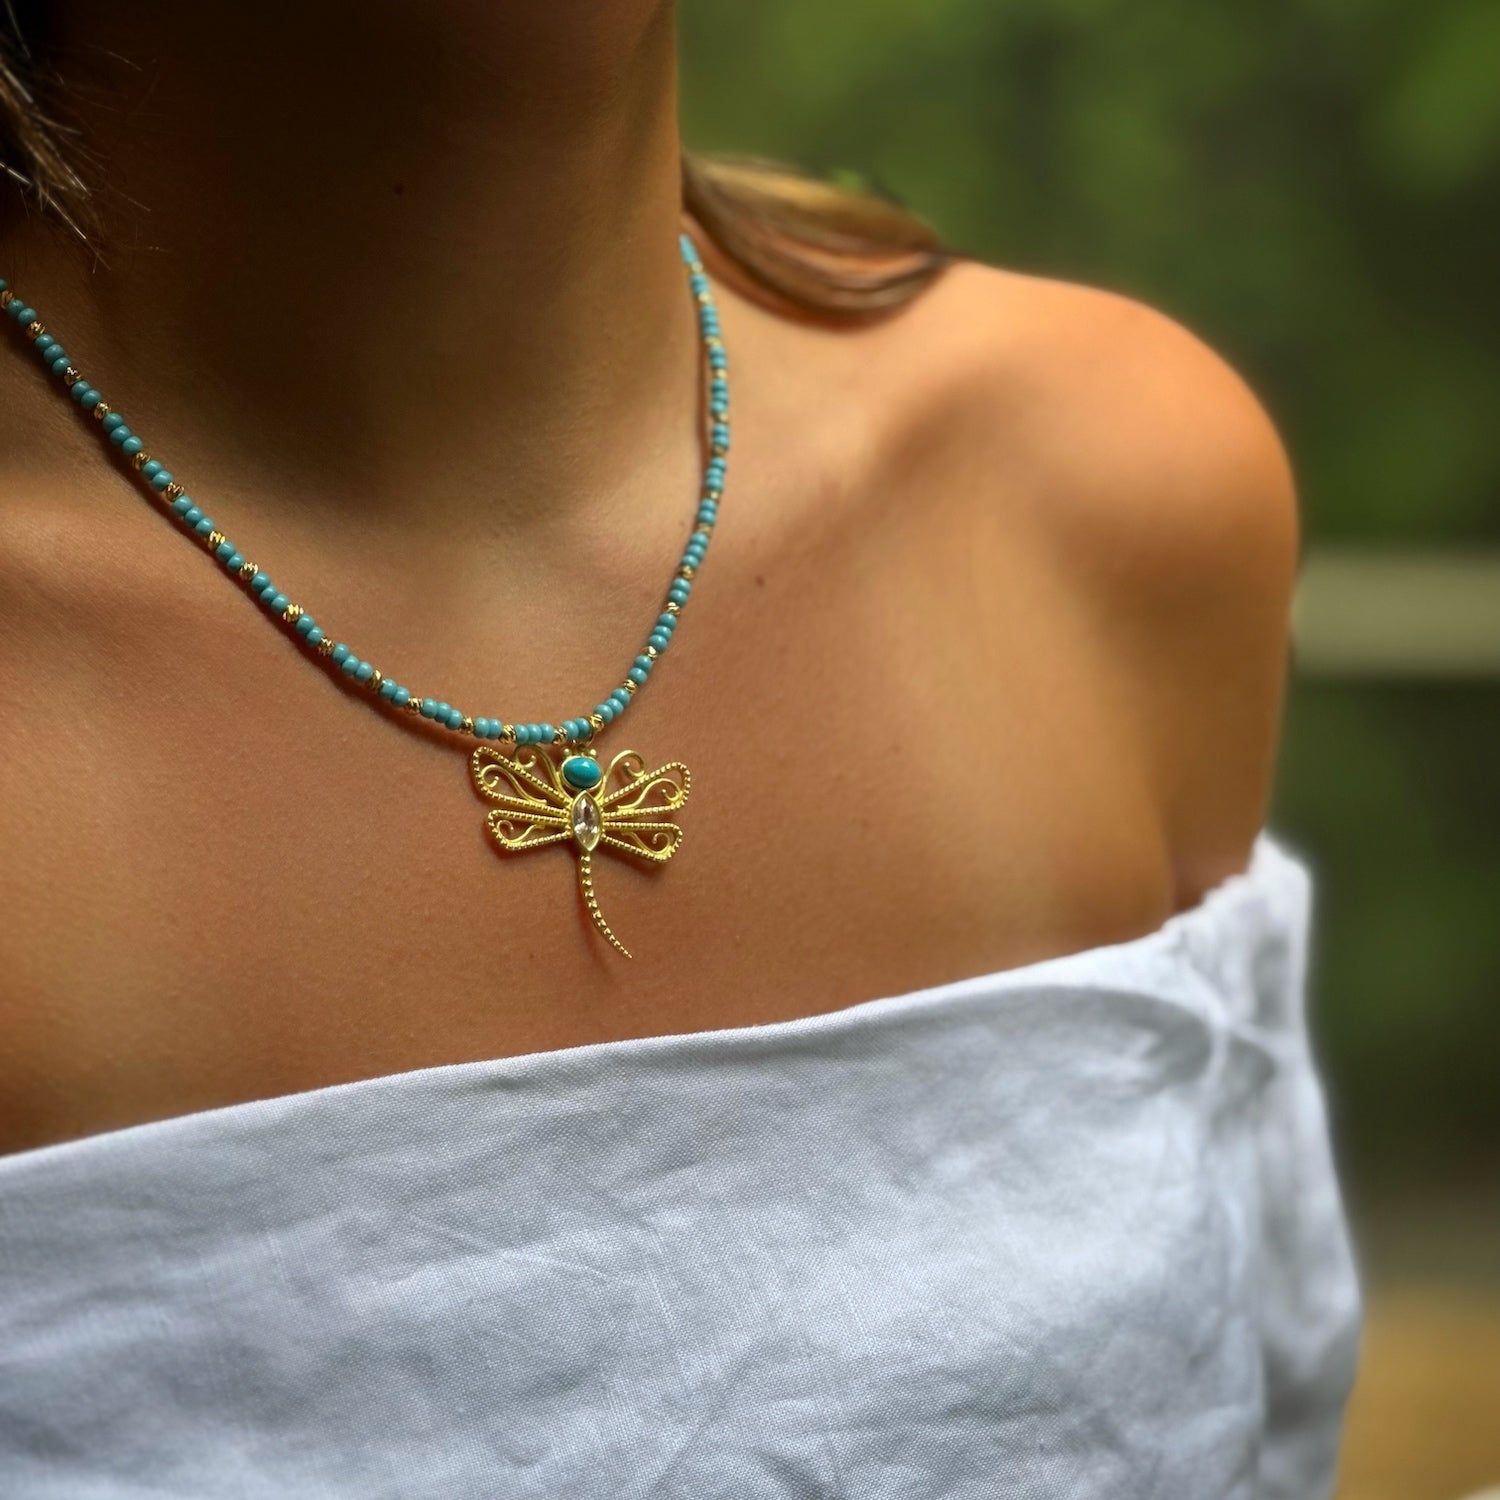 Model Embraces Transformation with Turquoise Dragonfly Necklace.